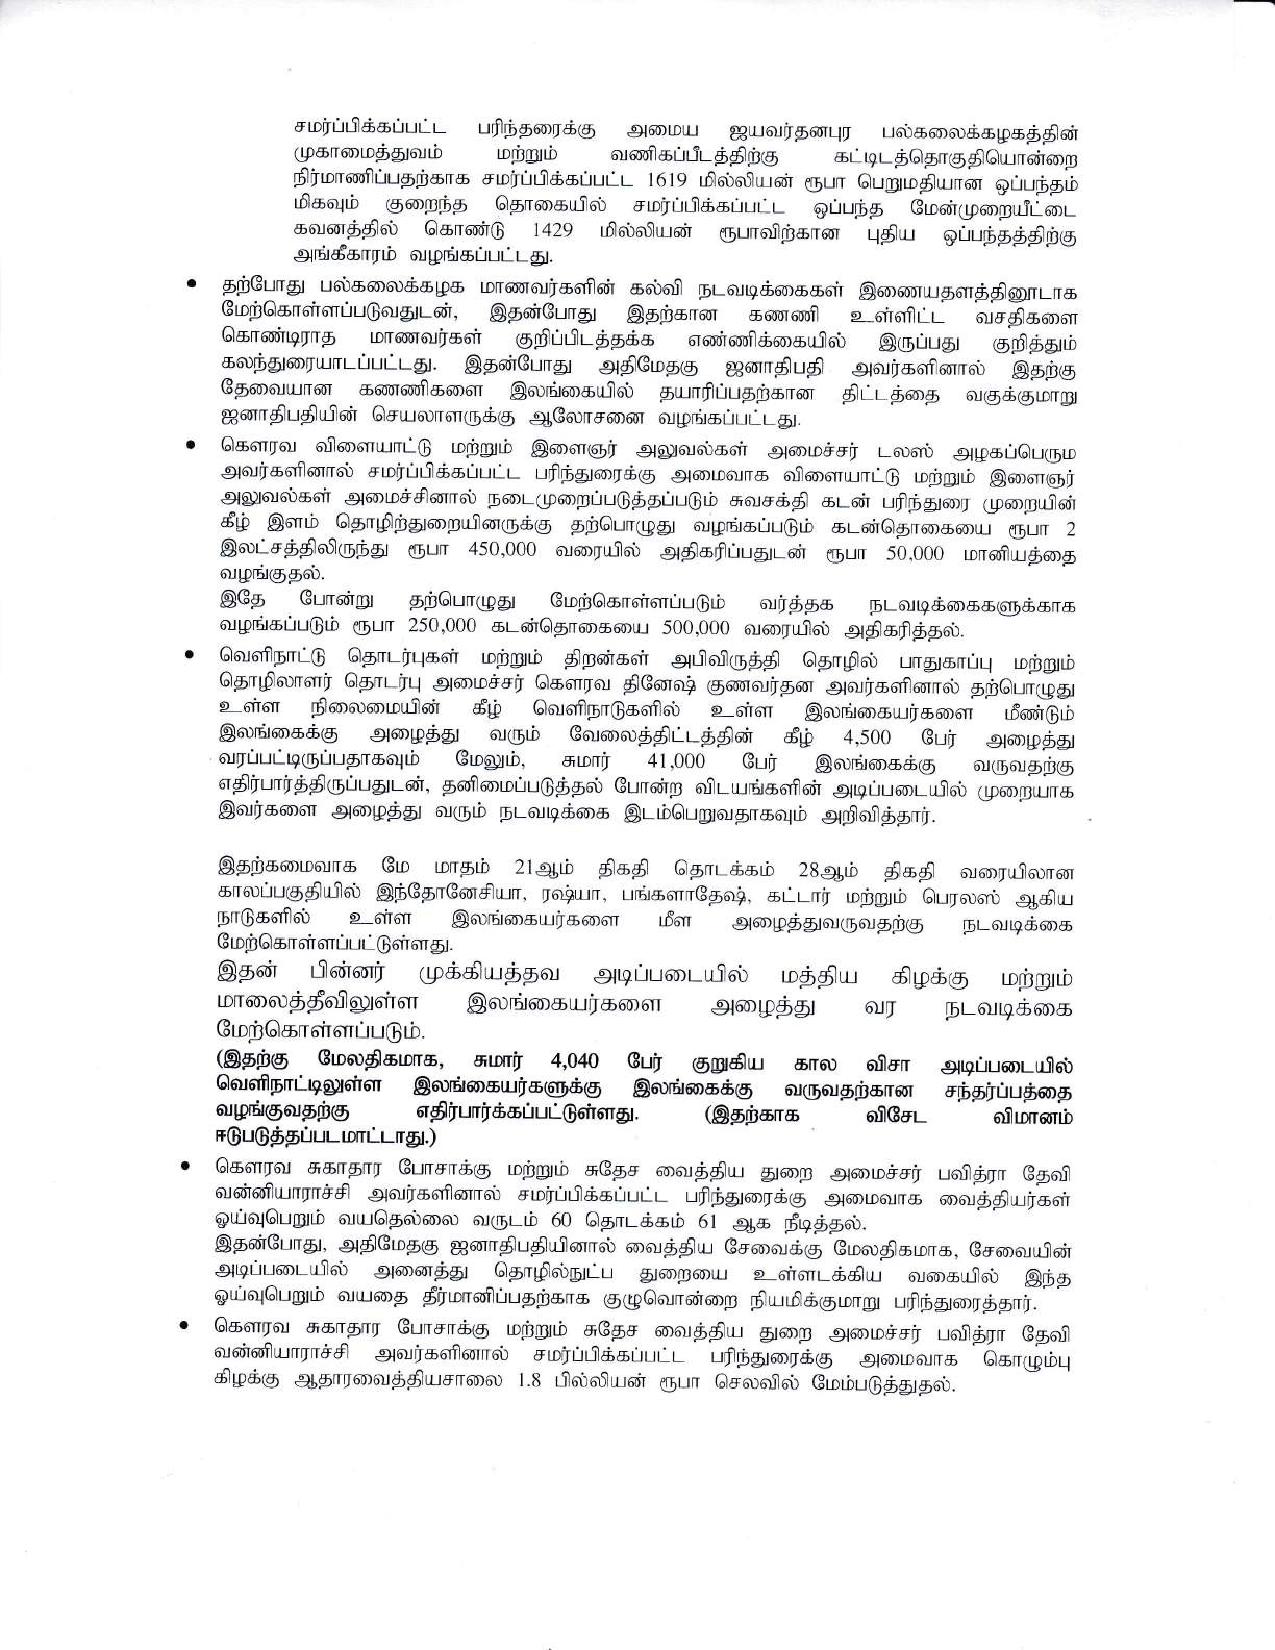 Cabinet Decisions 20.05.2020 Tamil compressed page 002